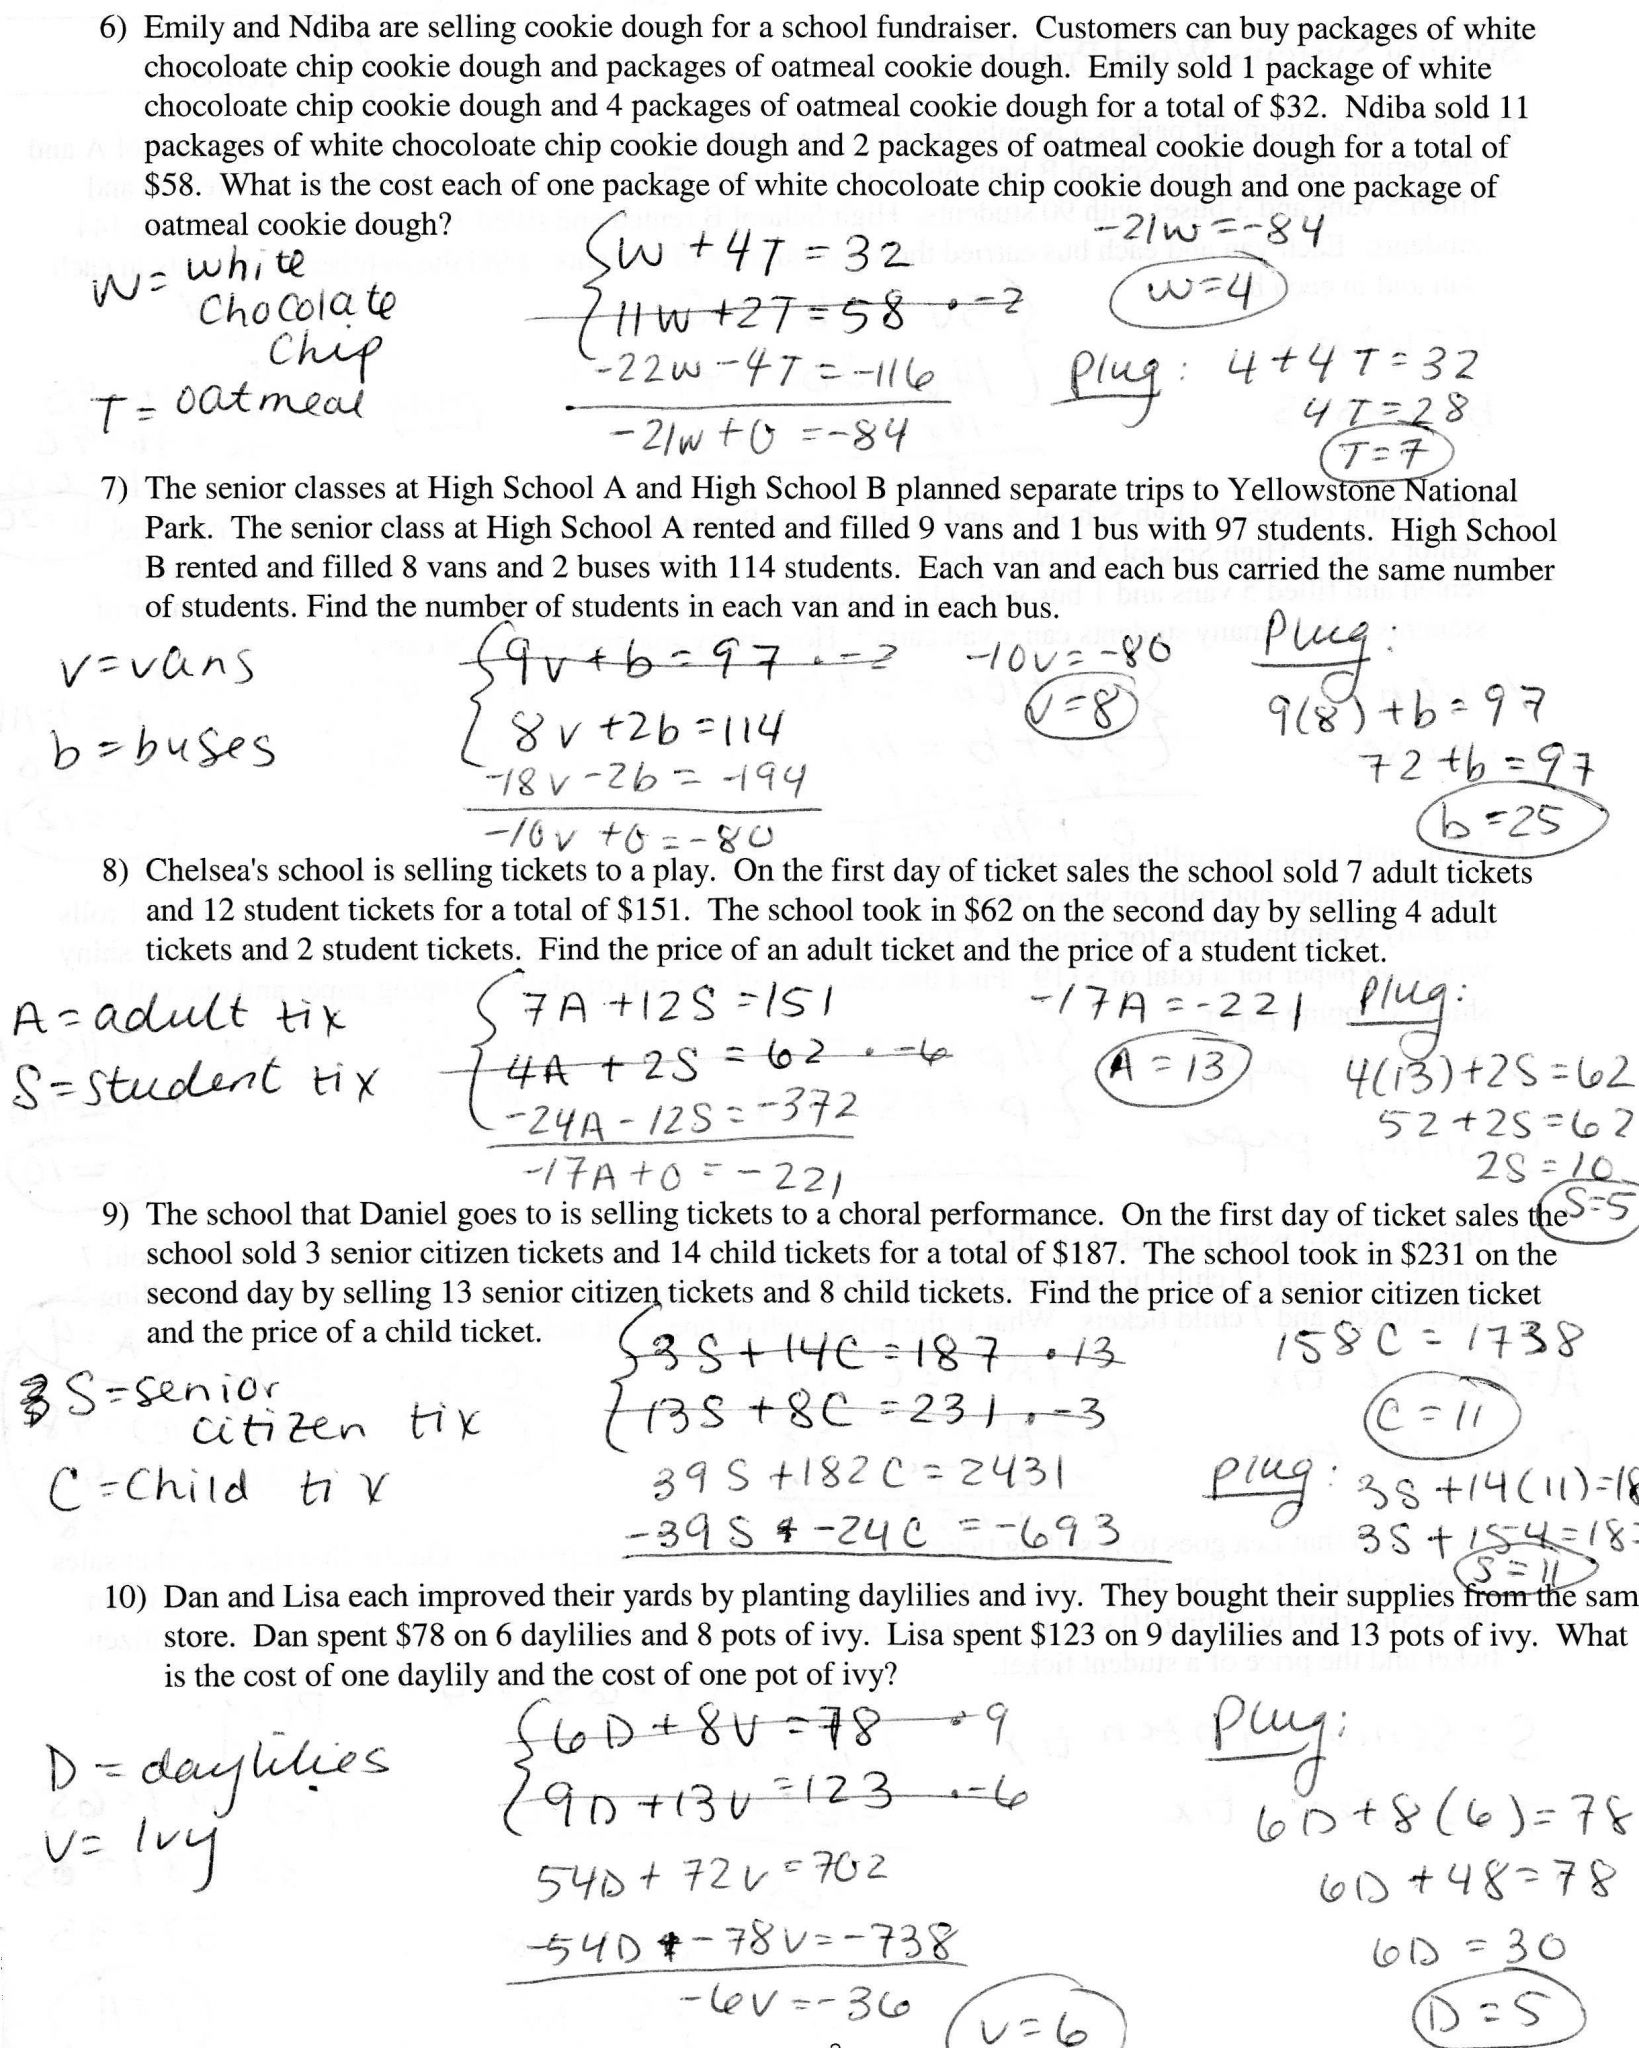 Solving Exponential Equations Worksheet Along with Exponential and Logarithmic Equations Worksheet Awesome Maths4all